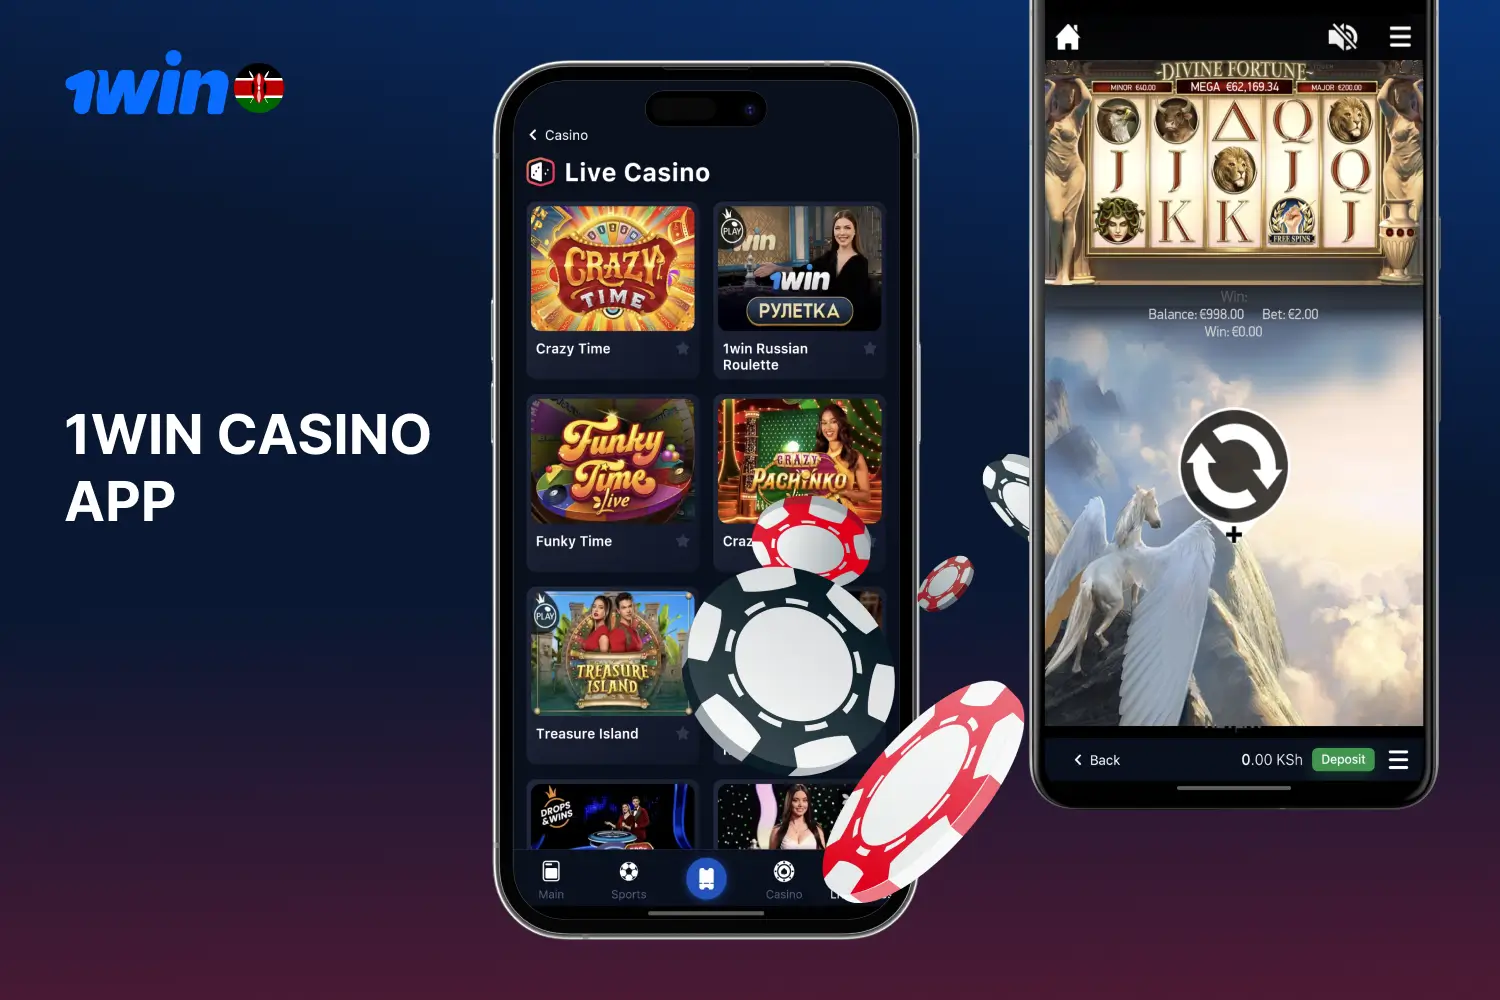 All of 1win's popular online casino games are available on its mobile app